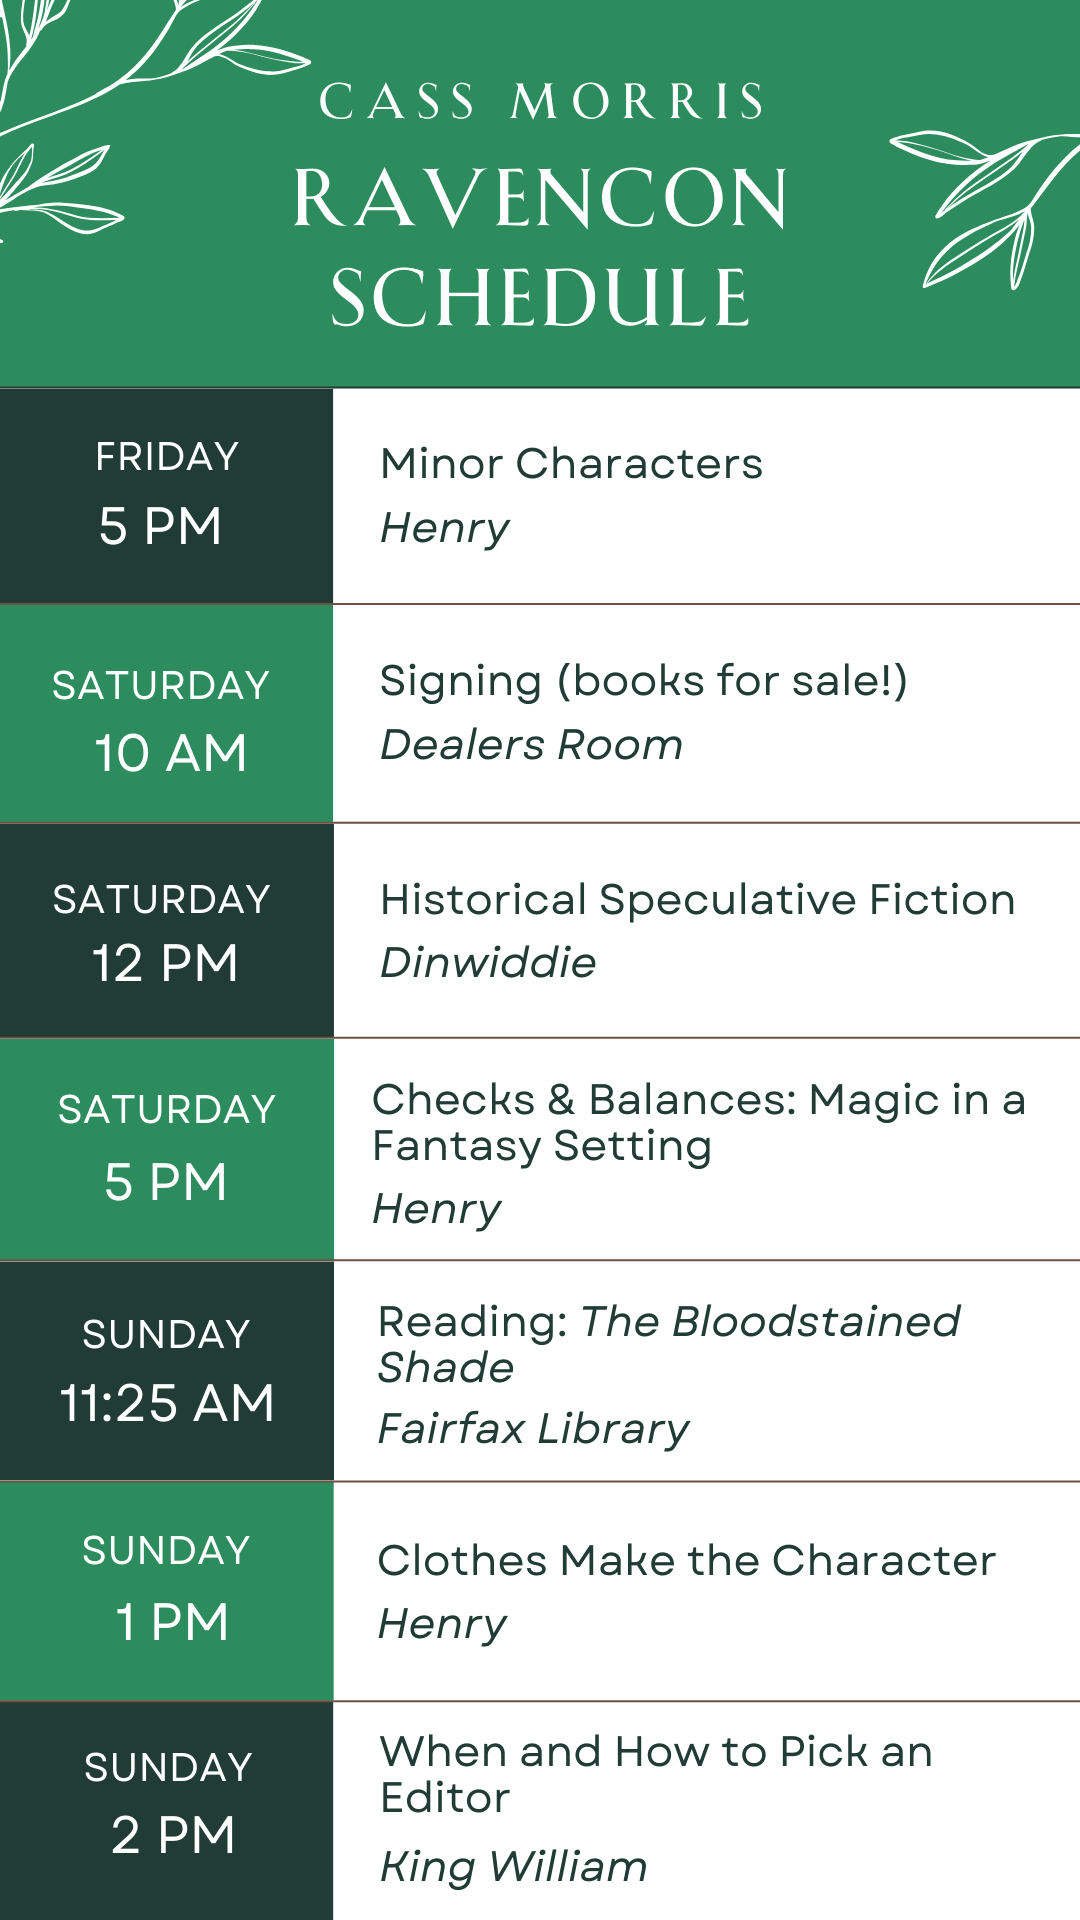 RavenCon Schedule Friday 5pm Minor Characters Henry | Saturday 10am Signing Dealers Room | Saturday 12pm Historical Speculative Fiction Dinwiddie | Saturday 5pm Checks and Balances Magic in a Fantasy Setting Henry | Sunday 11:25am Reading The Bloodstained Shade Fairfax Library | Sunday 1pm Clothes Make the Character Henry | Sunday 2pm When and How to Pick an Editor King William